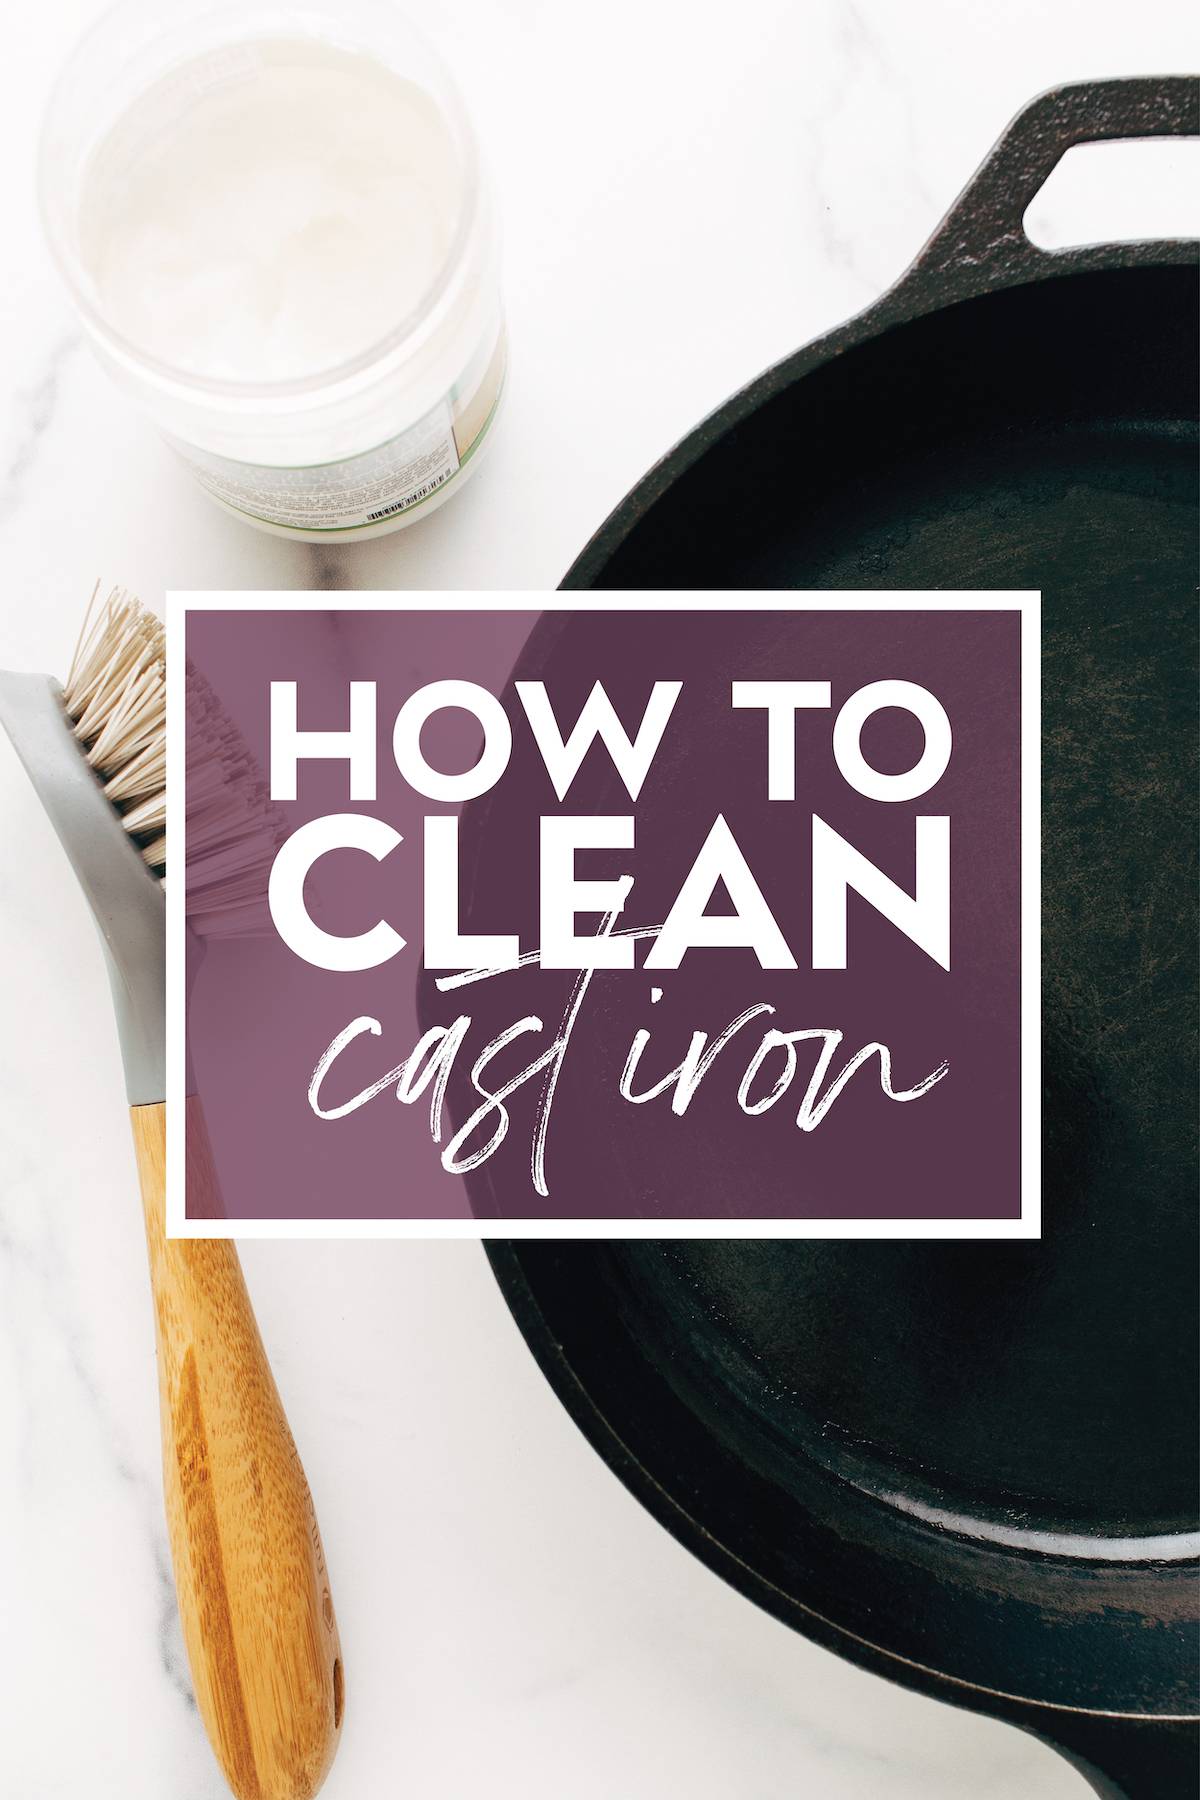 Image of cast iron skillet and brush with "How to clean cast iron" text overlay.